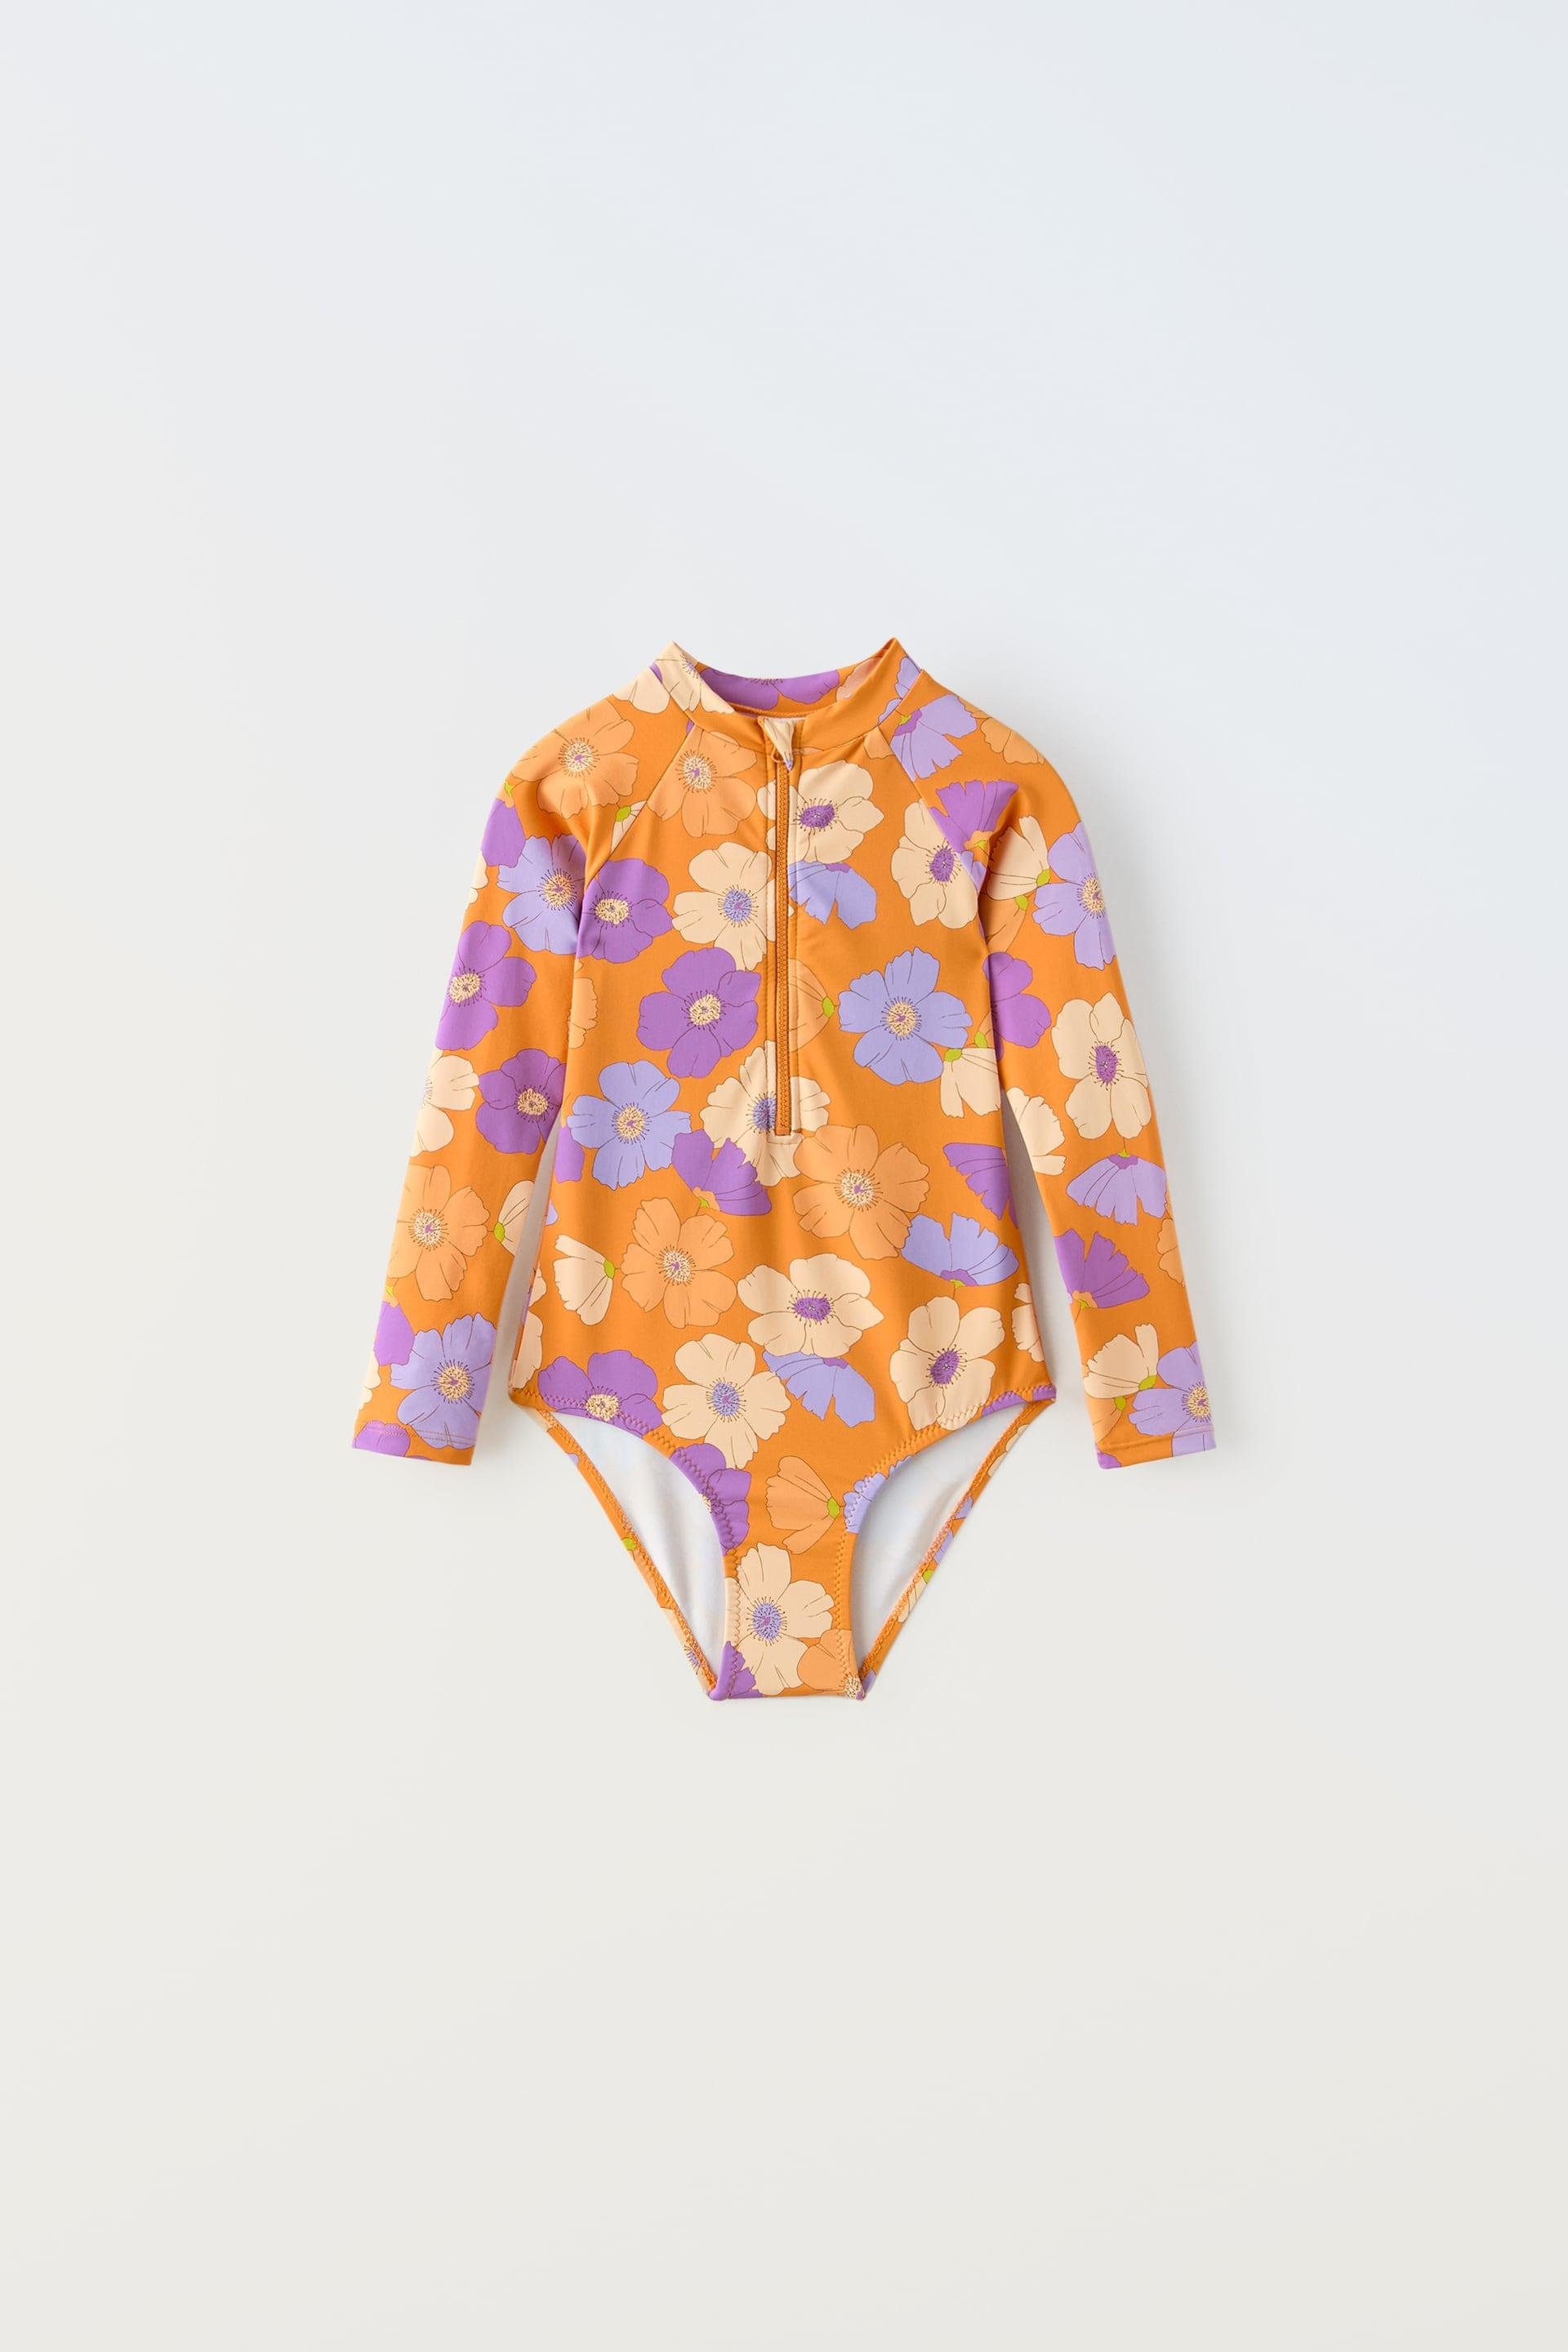 FLORAL SURF SWIMMING MAILLOT by ZARA